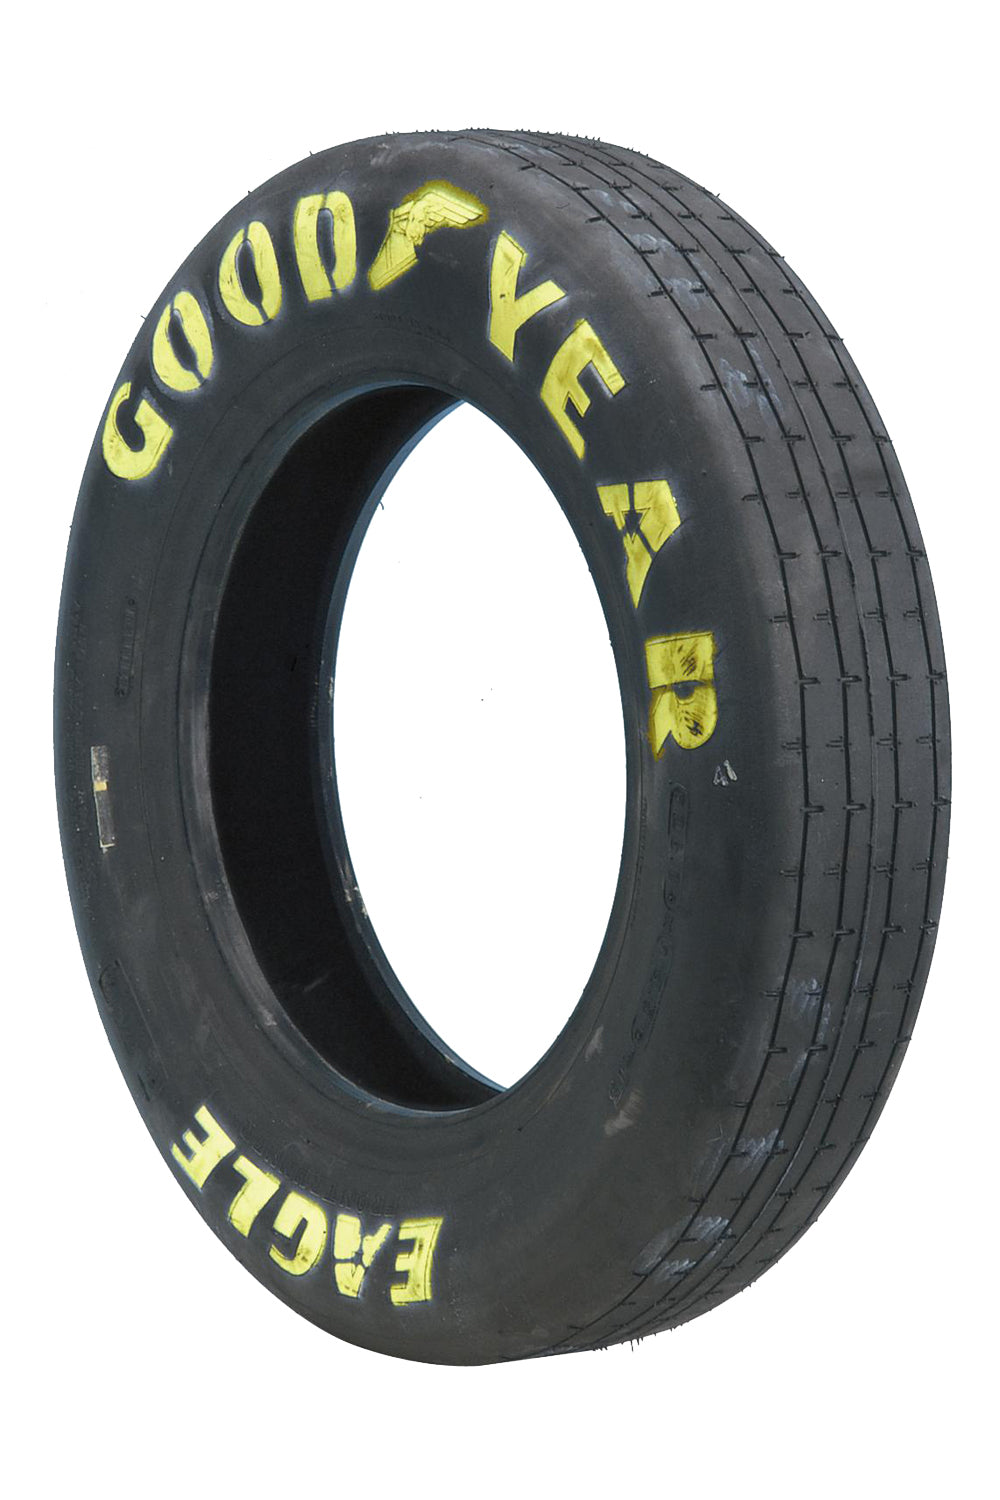 Goodyear 28.0/4.5-15 Front Runner GDYD1966